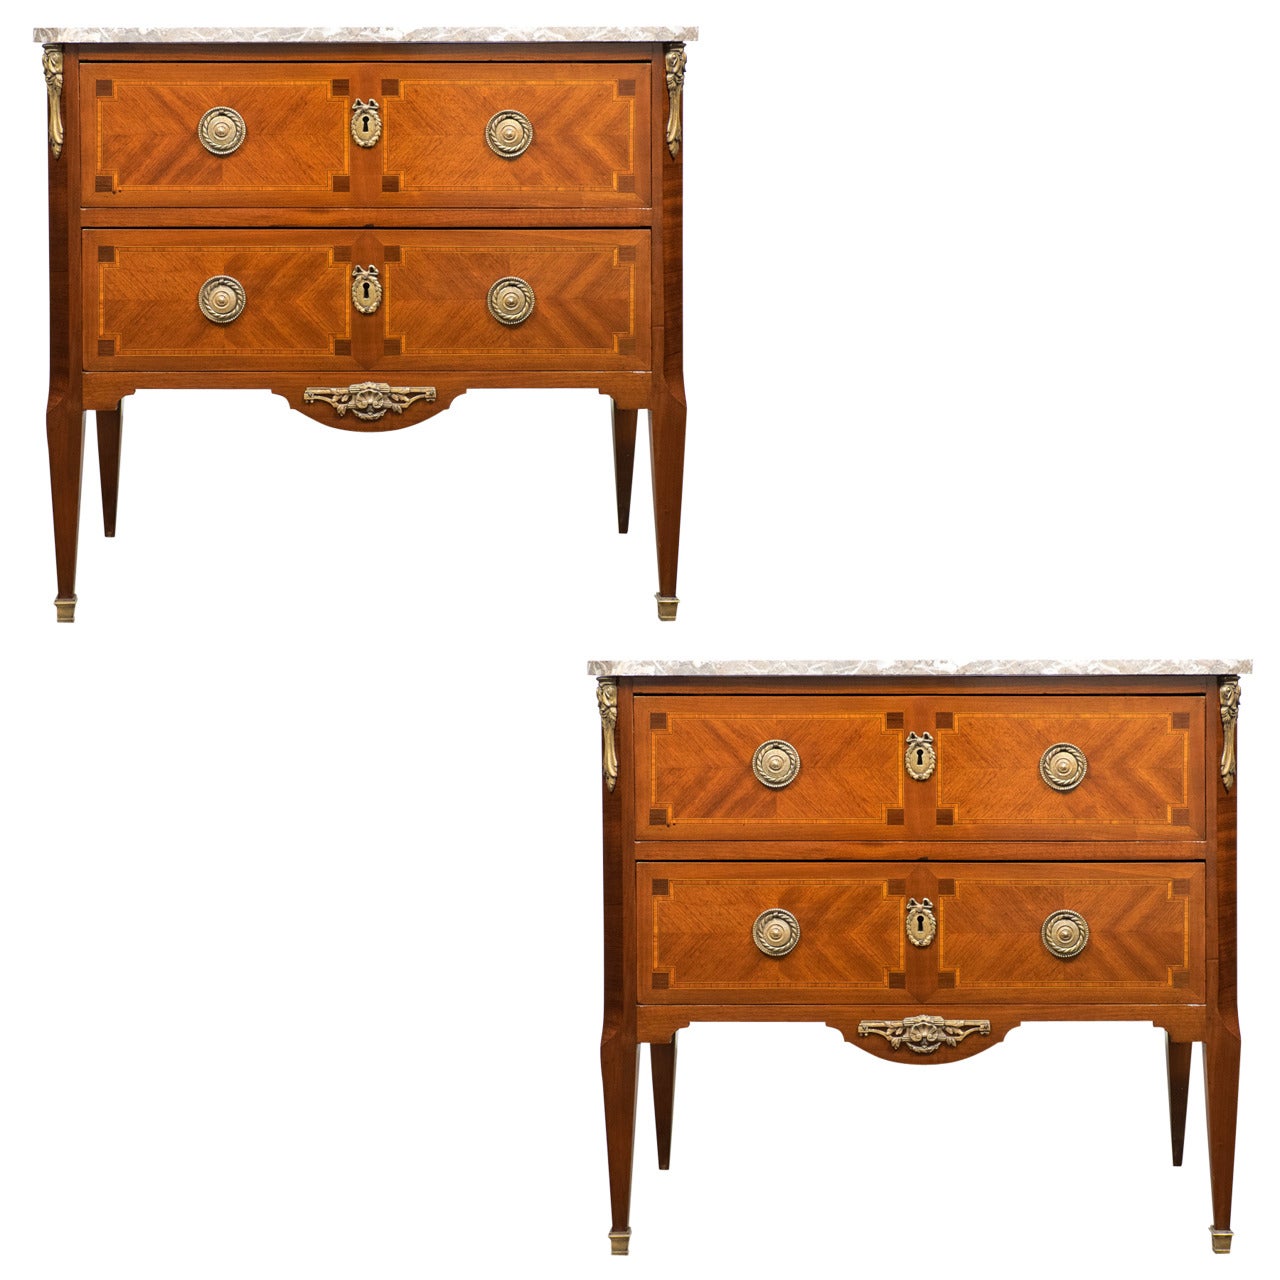 Rare Pair of French Antique Chests of Drawers